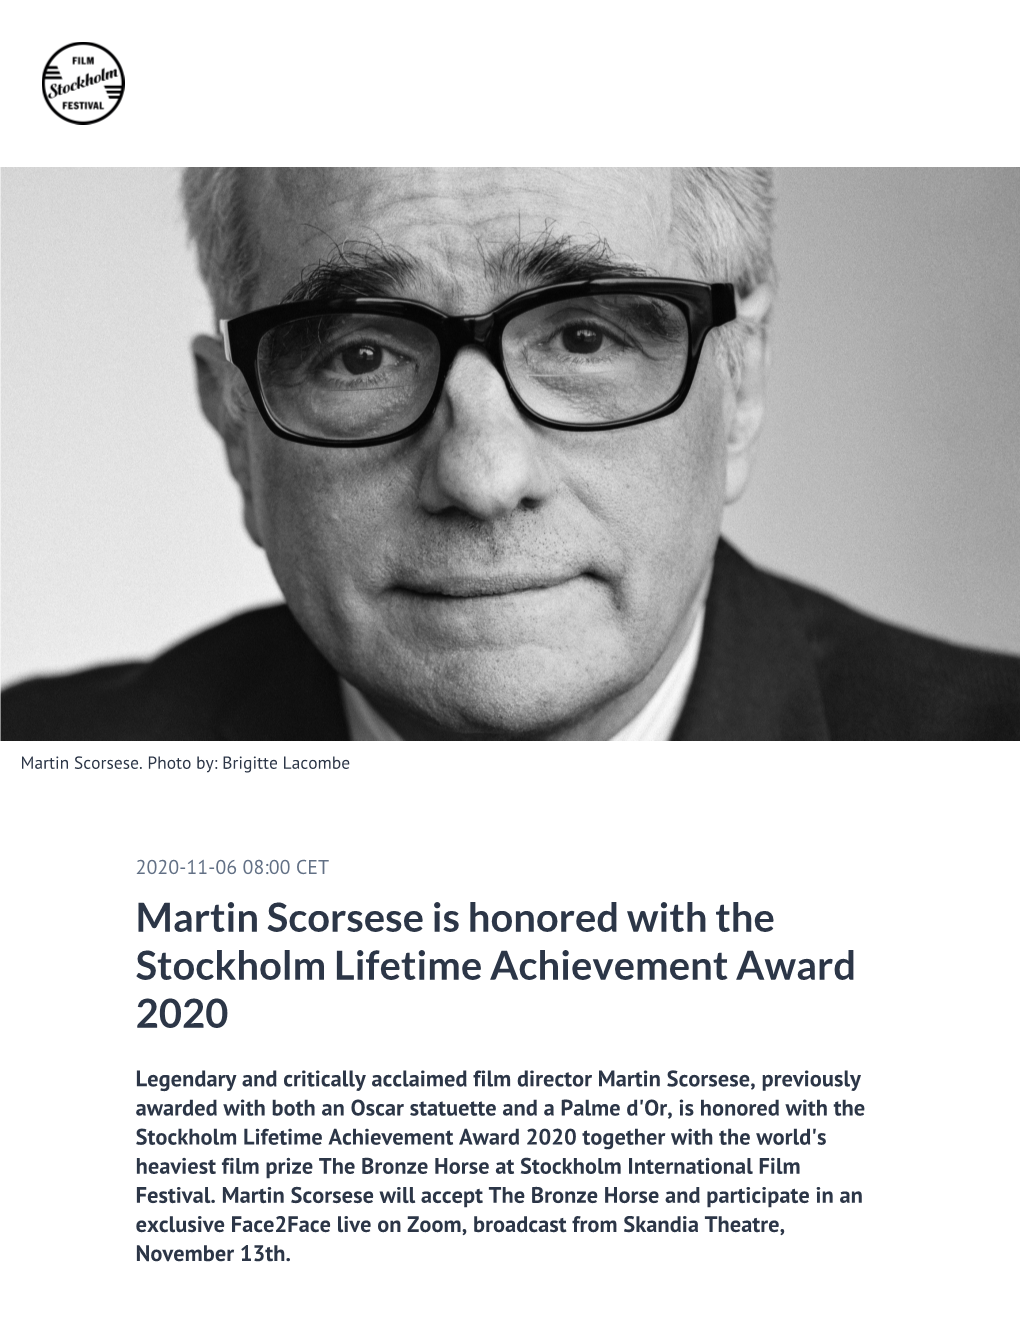 Martin Scorsese Is Honored with the Stockholm Lifetime Achievement Award 2020